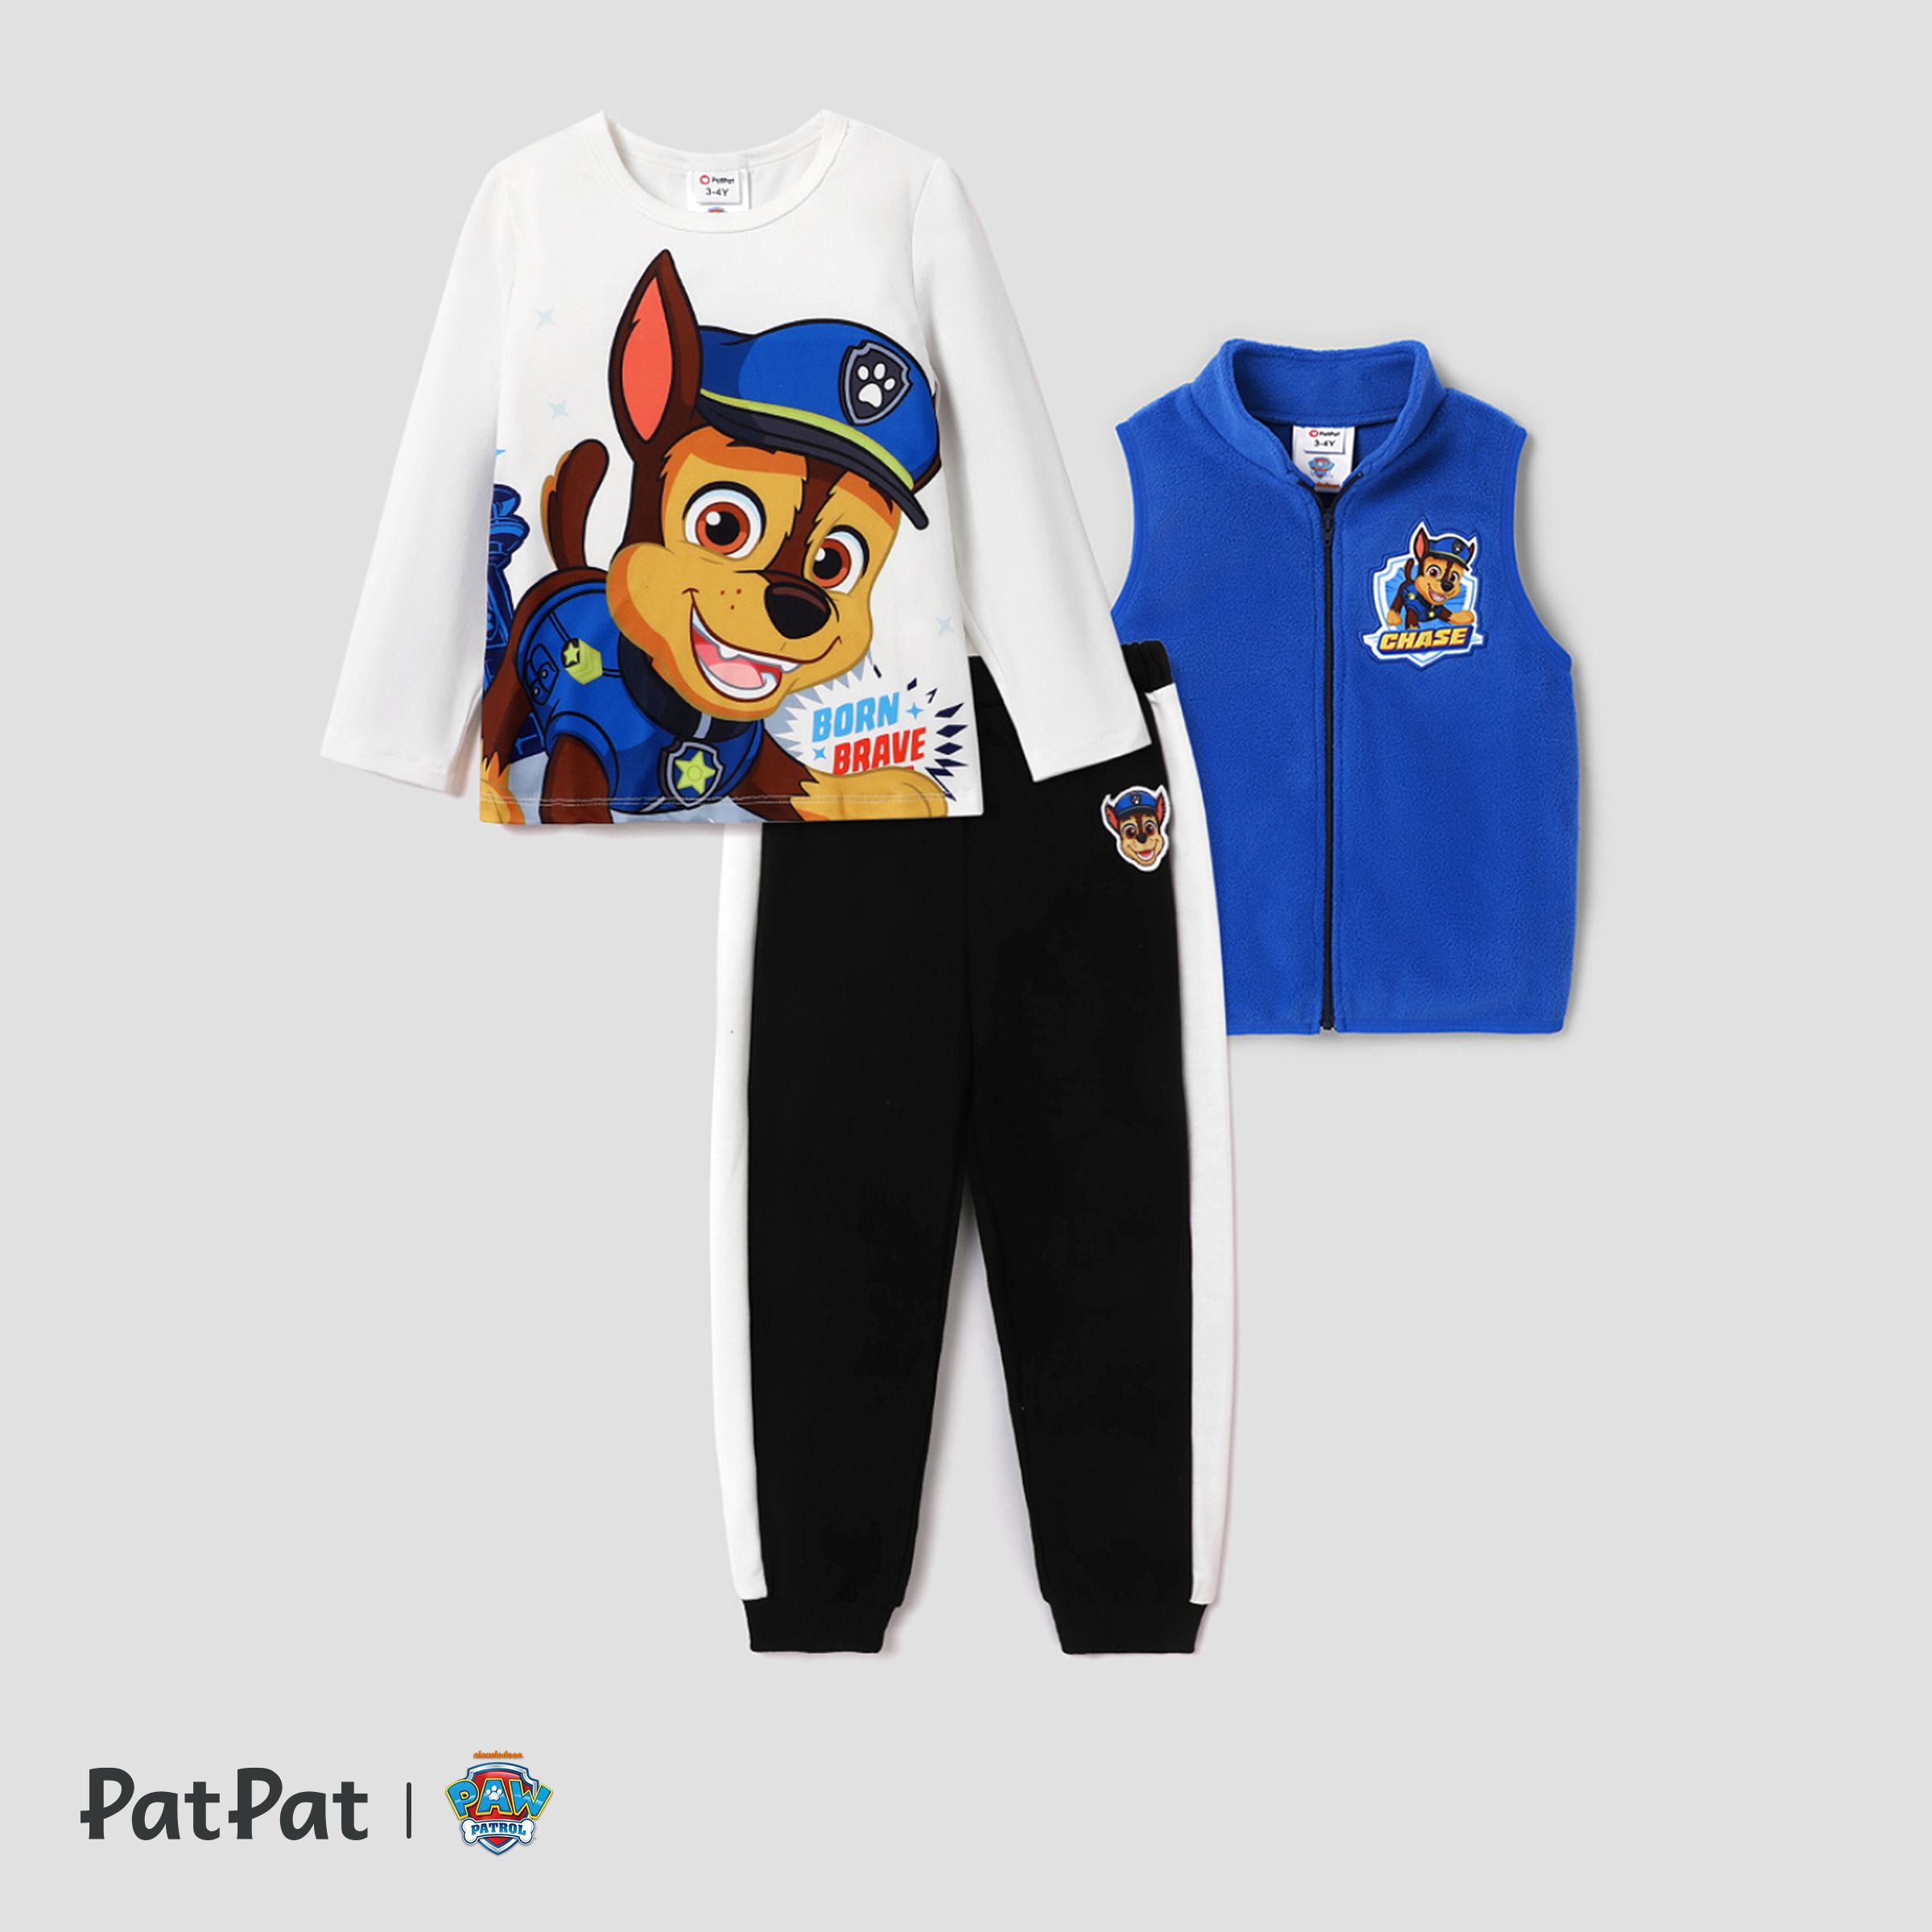 PAW Patrol Toddler Boy Character Print White Top Or Blue Waistcoat Or Black Pants